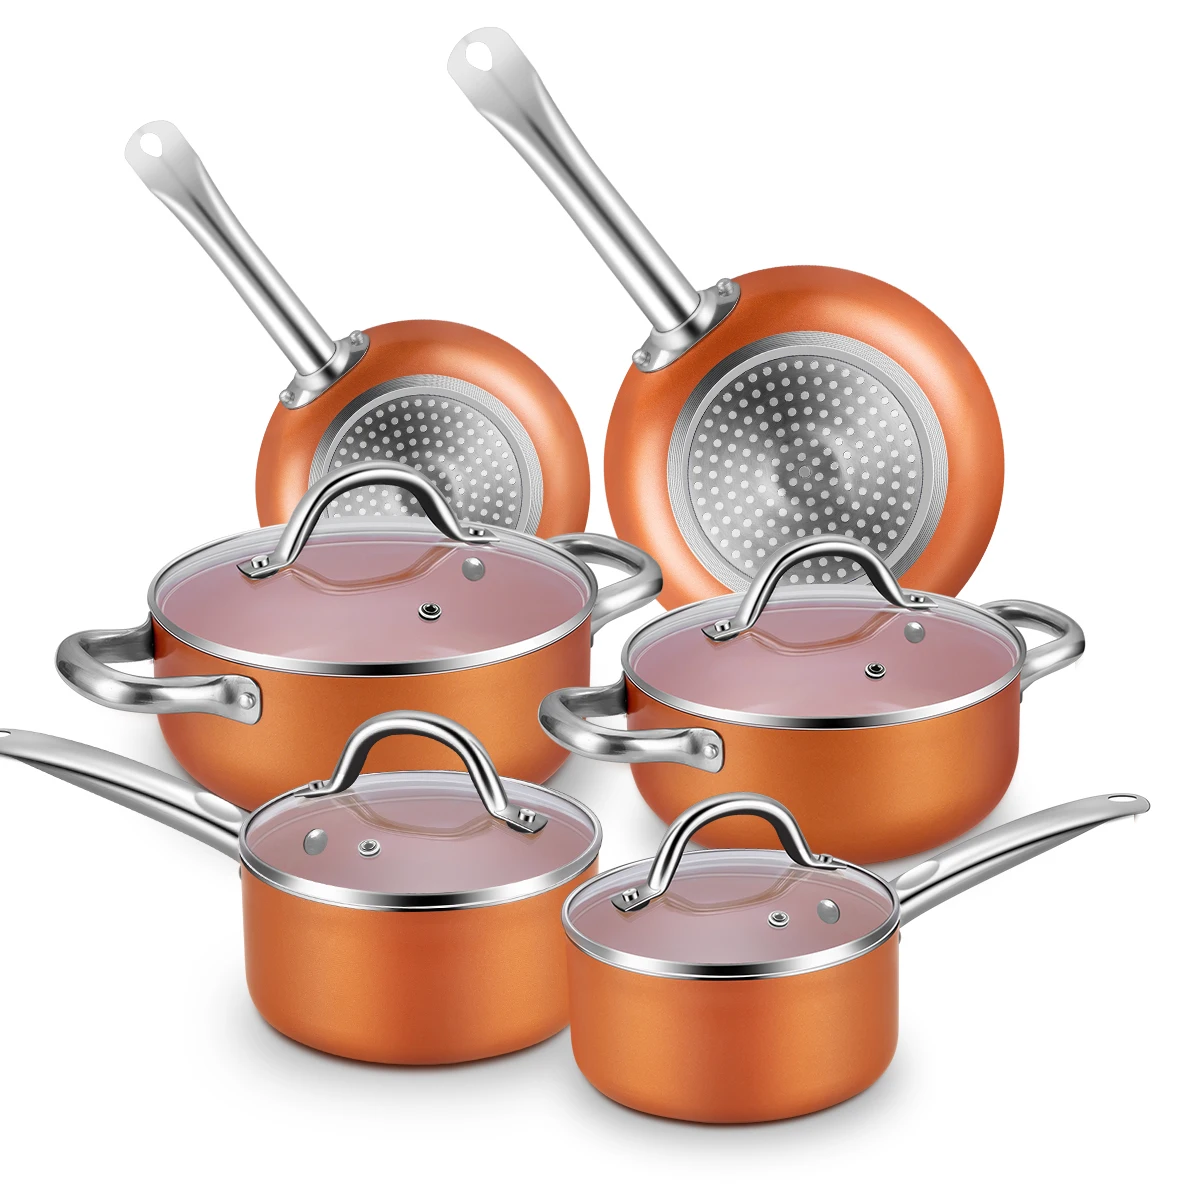 

Housewares Eco-friendly Kitchen Cooking Pot Nonstick induction Cookware Sets Stainless Steel Frying Pan Stock Pots